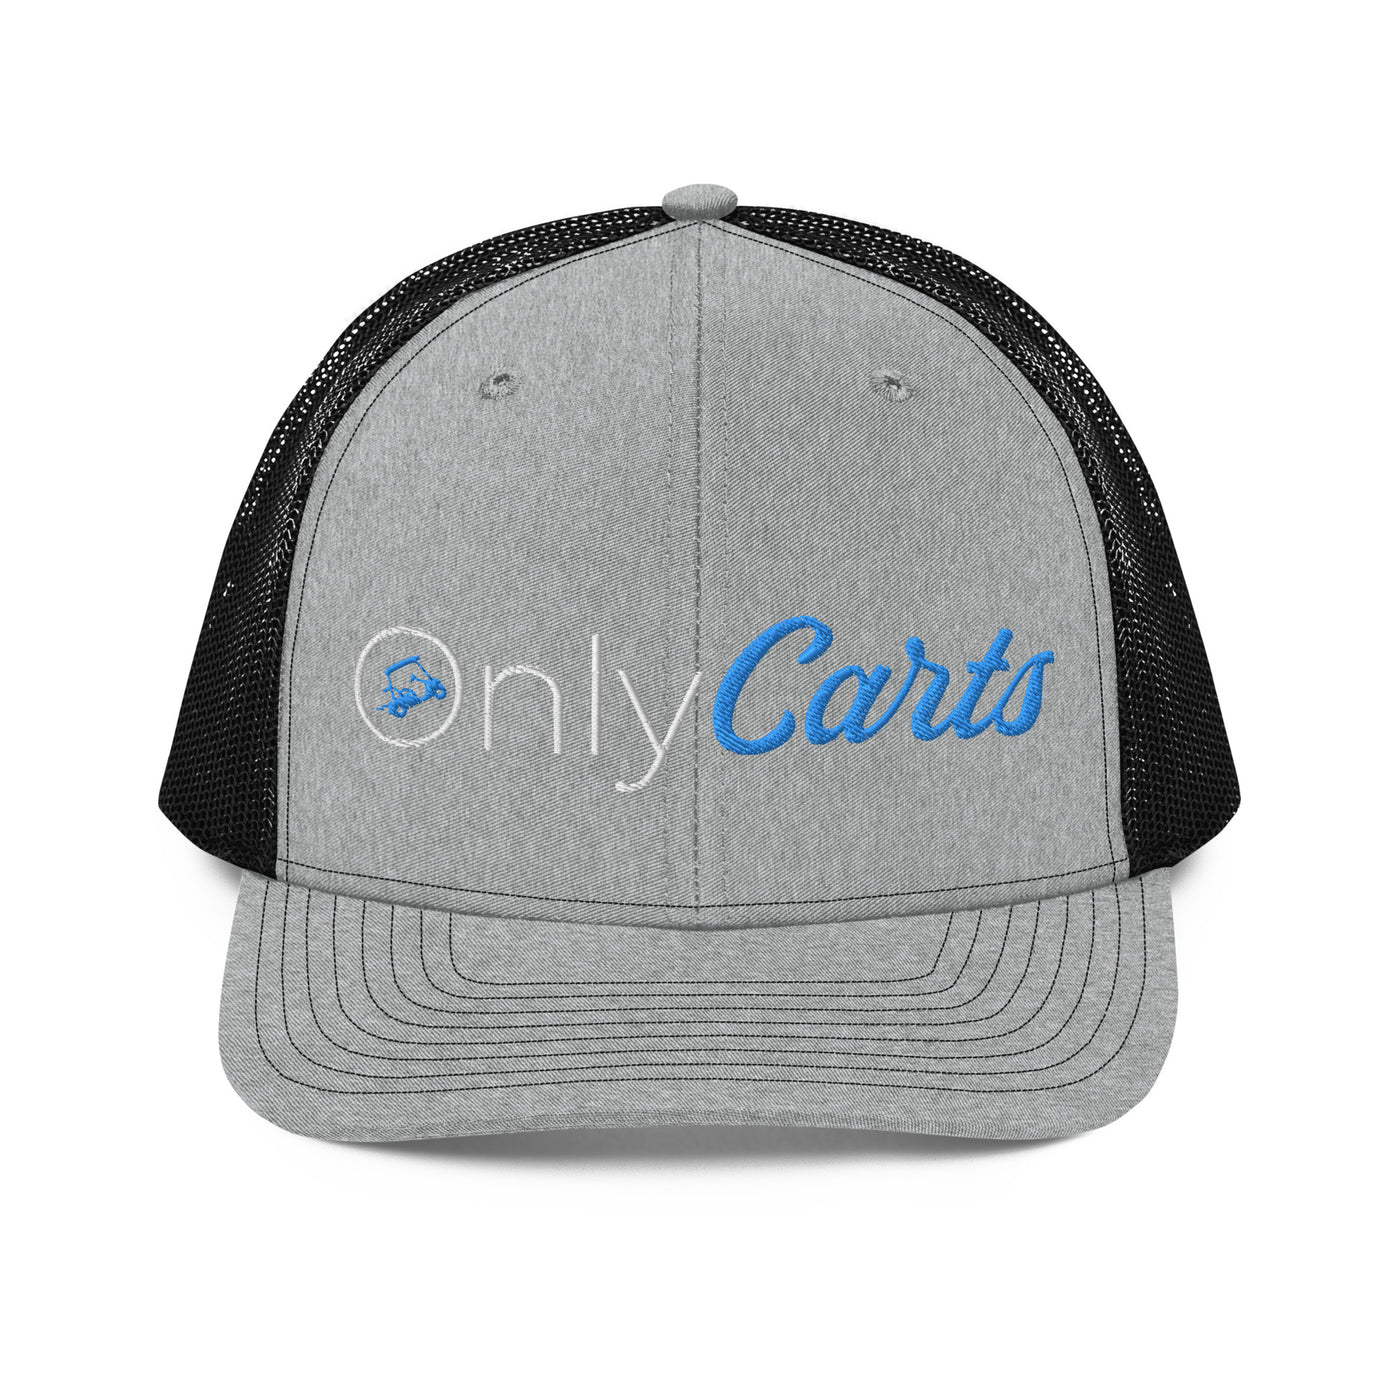 OnlyCarts Trucker logo hat by Golf Carts Modified